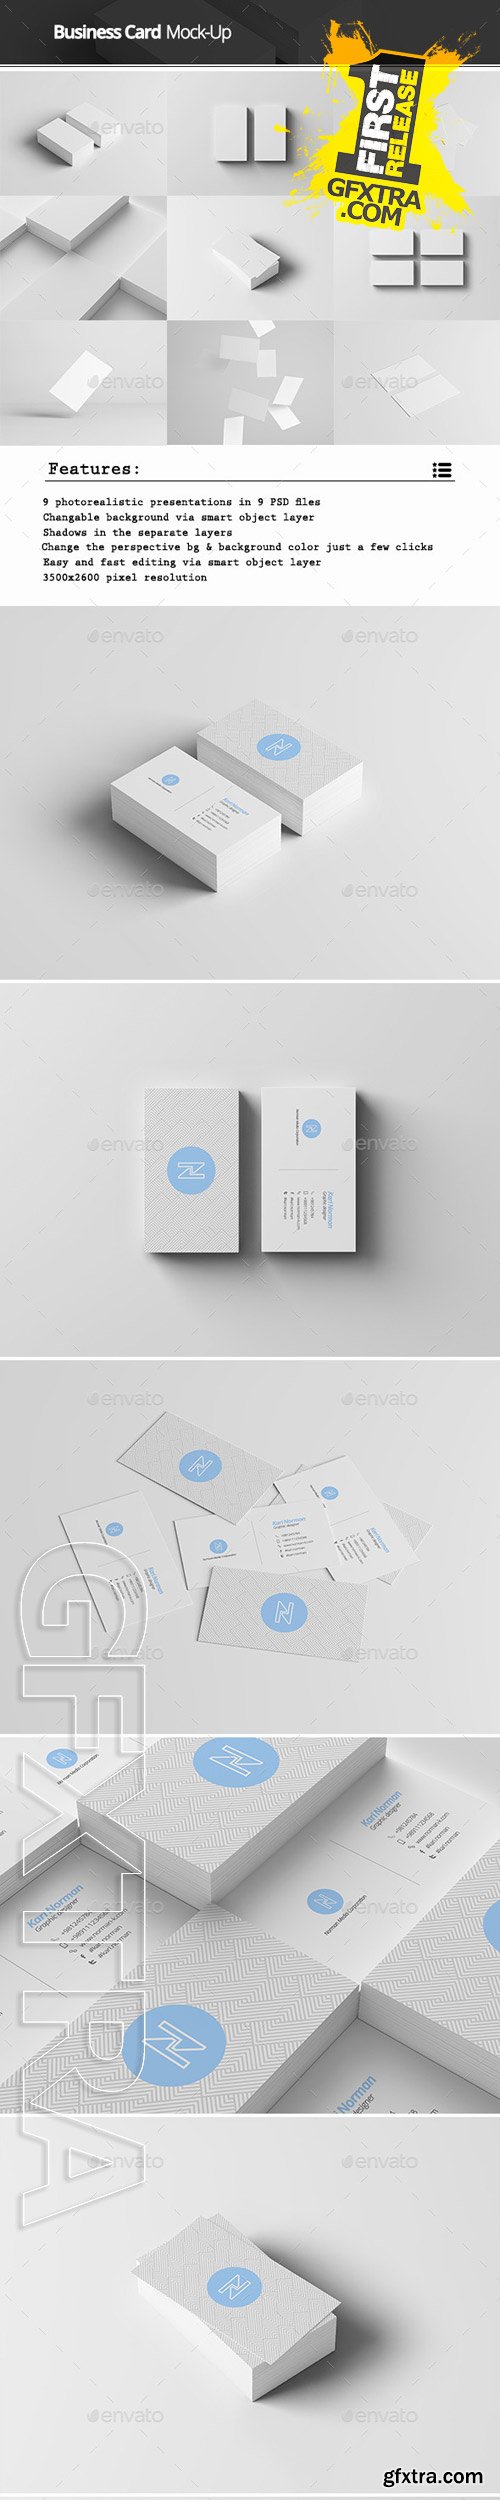 Graphicriver - Business Card Mock-Up 10503809